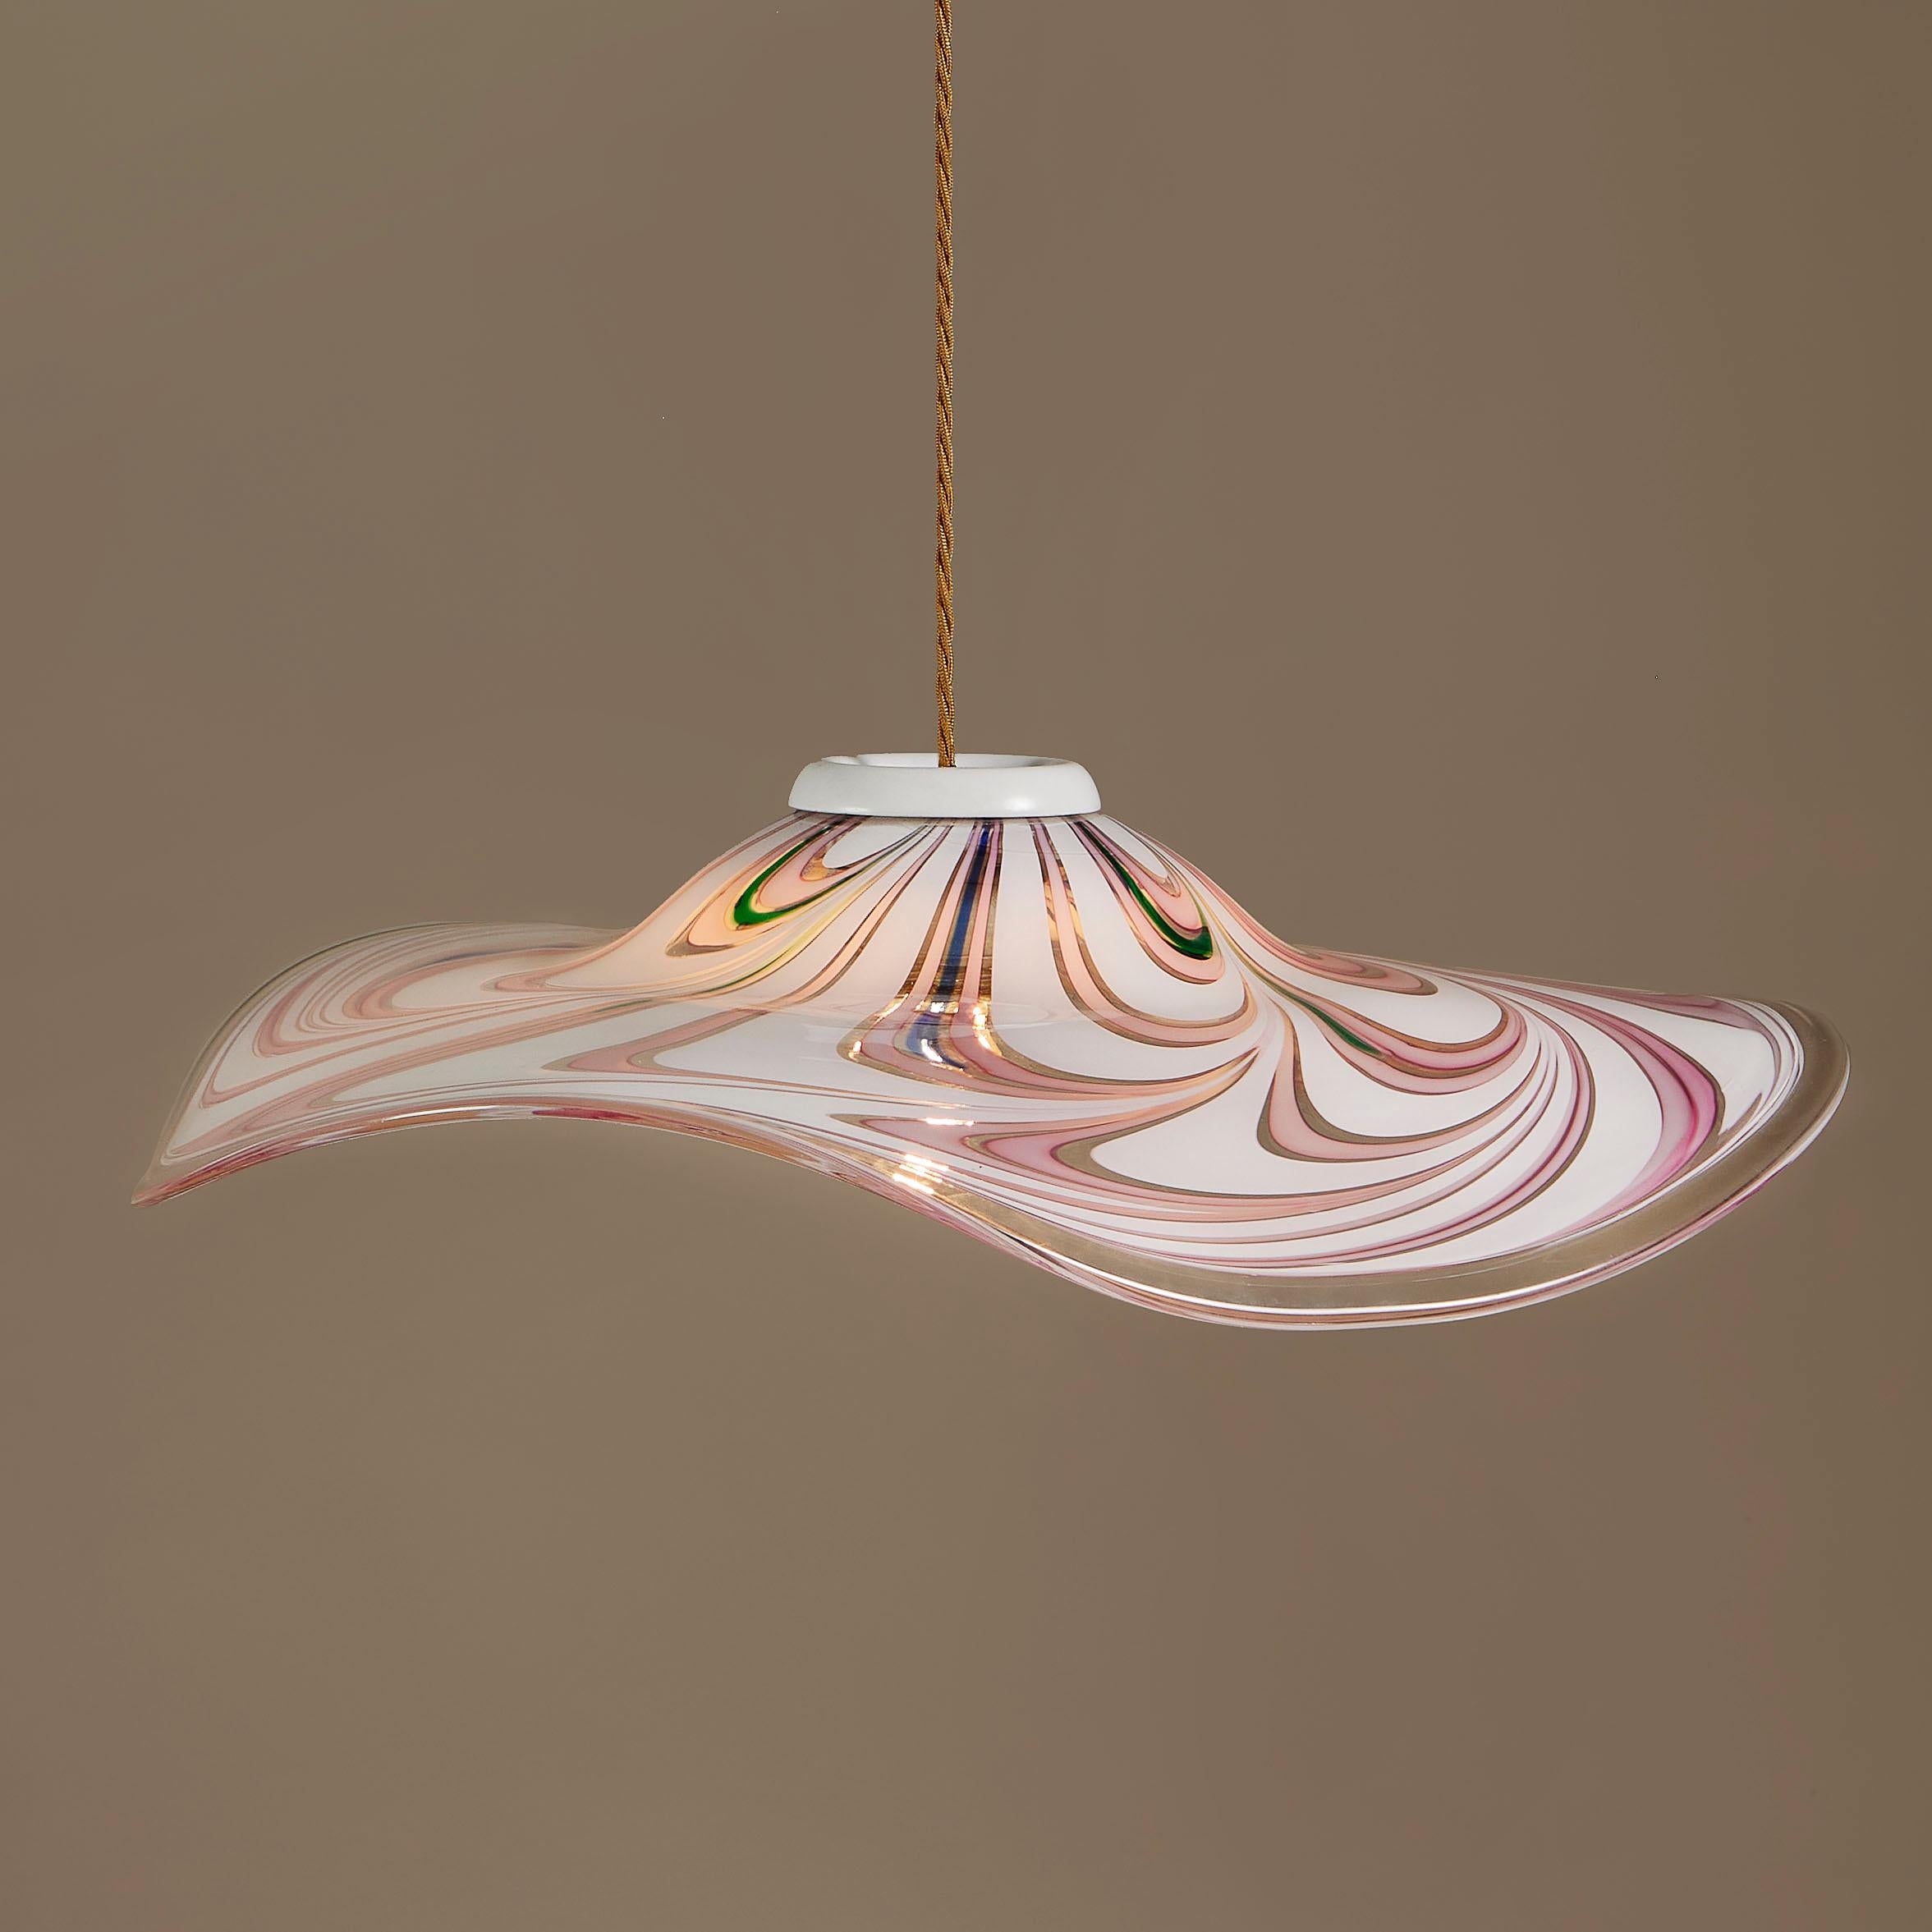 Wide undulating Murano glass pendant with bold pink, white and clear swirl pattern with a splash of blue and green at the top.
